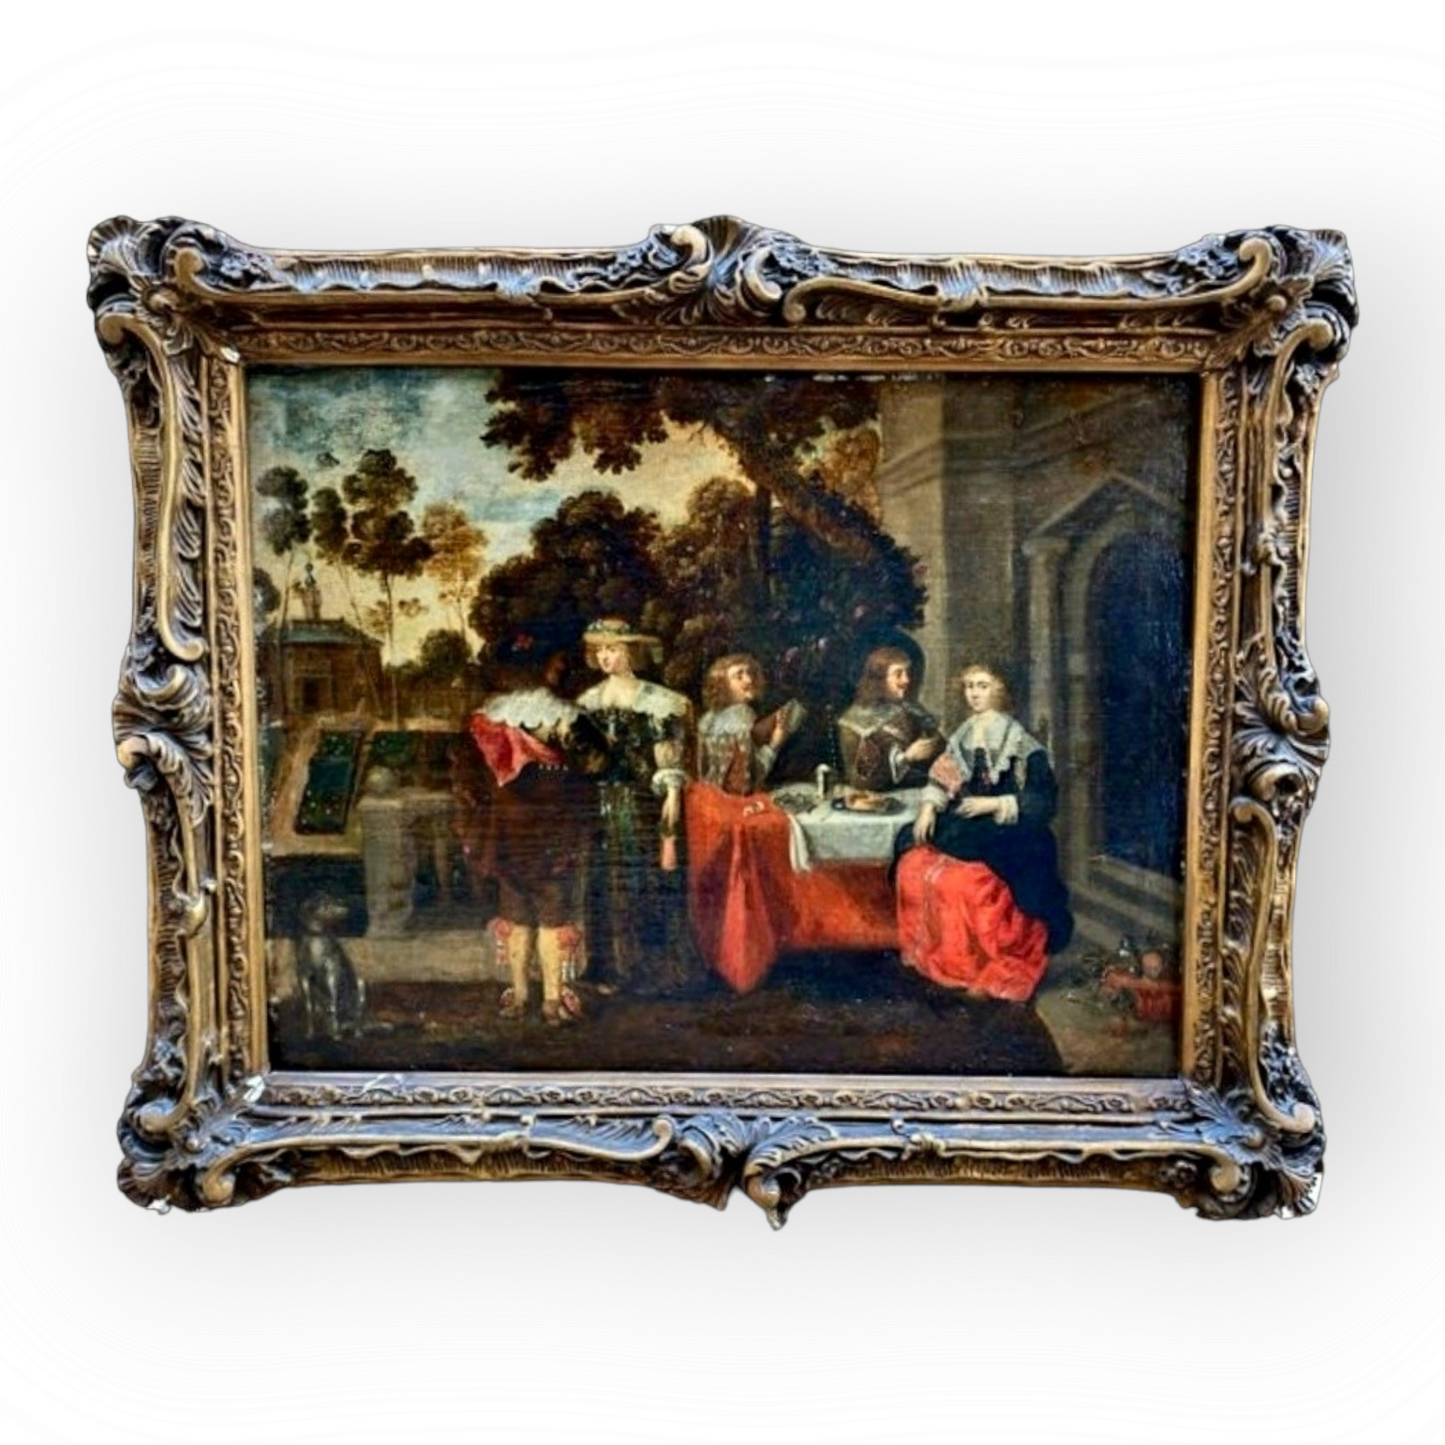 A mid-17th Century Flemish antique oil on canvas depicting courtiers banqueting.